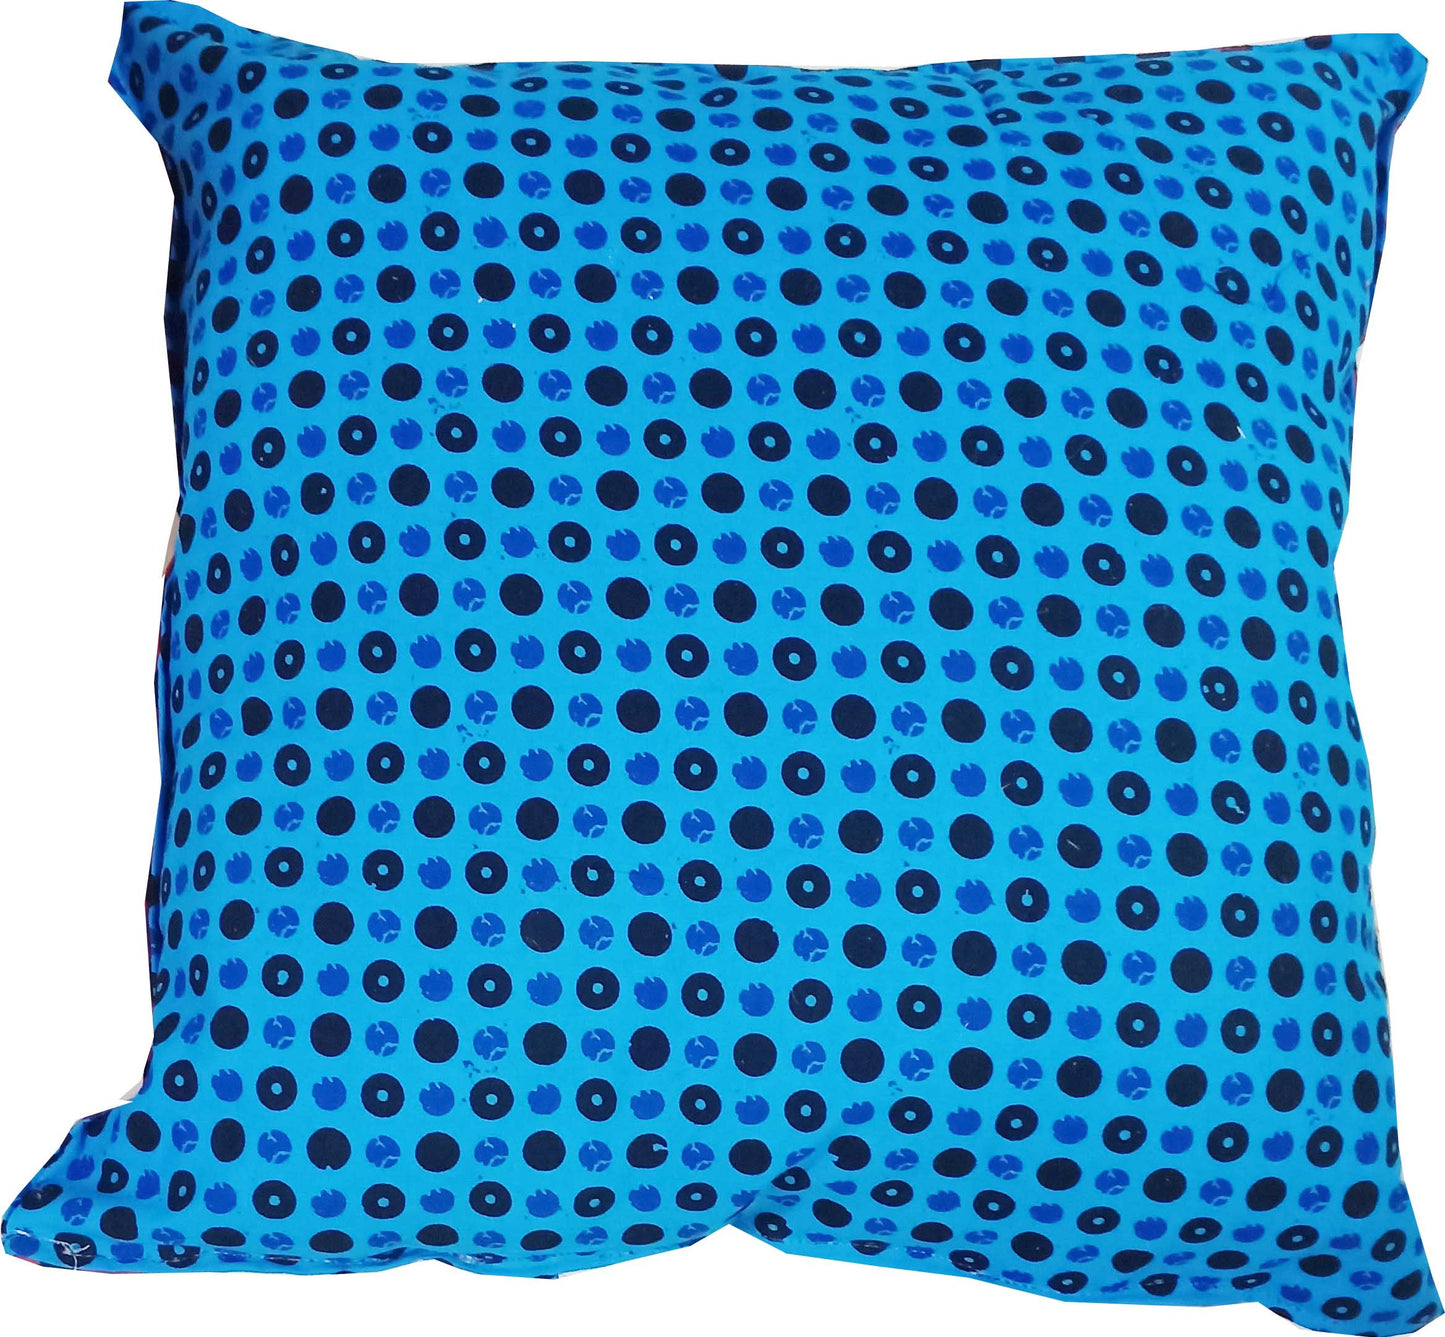 Handmakers Cotton Square Chair Pad Seat Cushion (18 inch X 18 Inch, Blue)